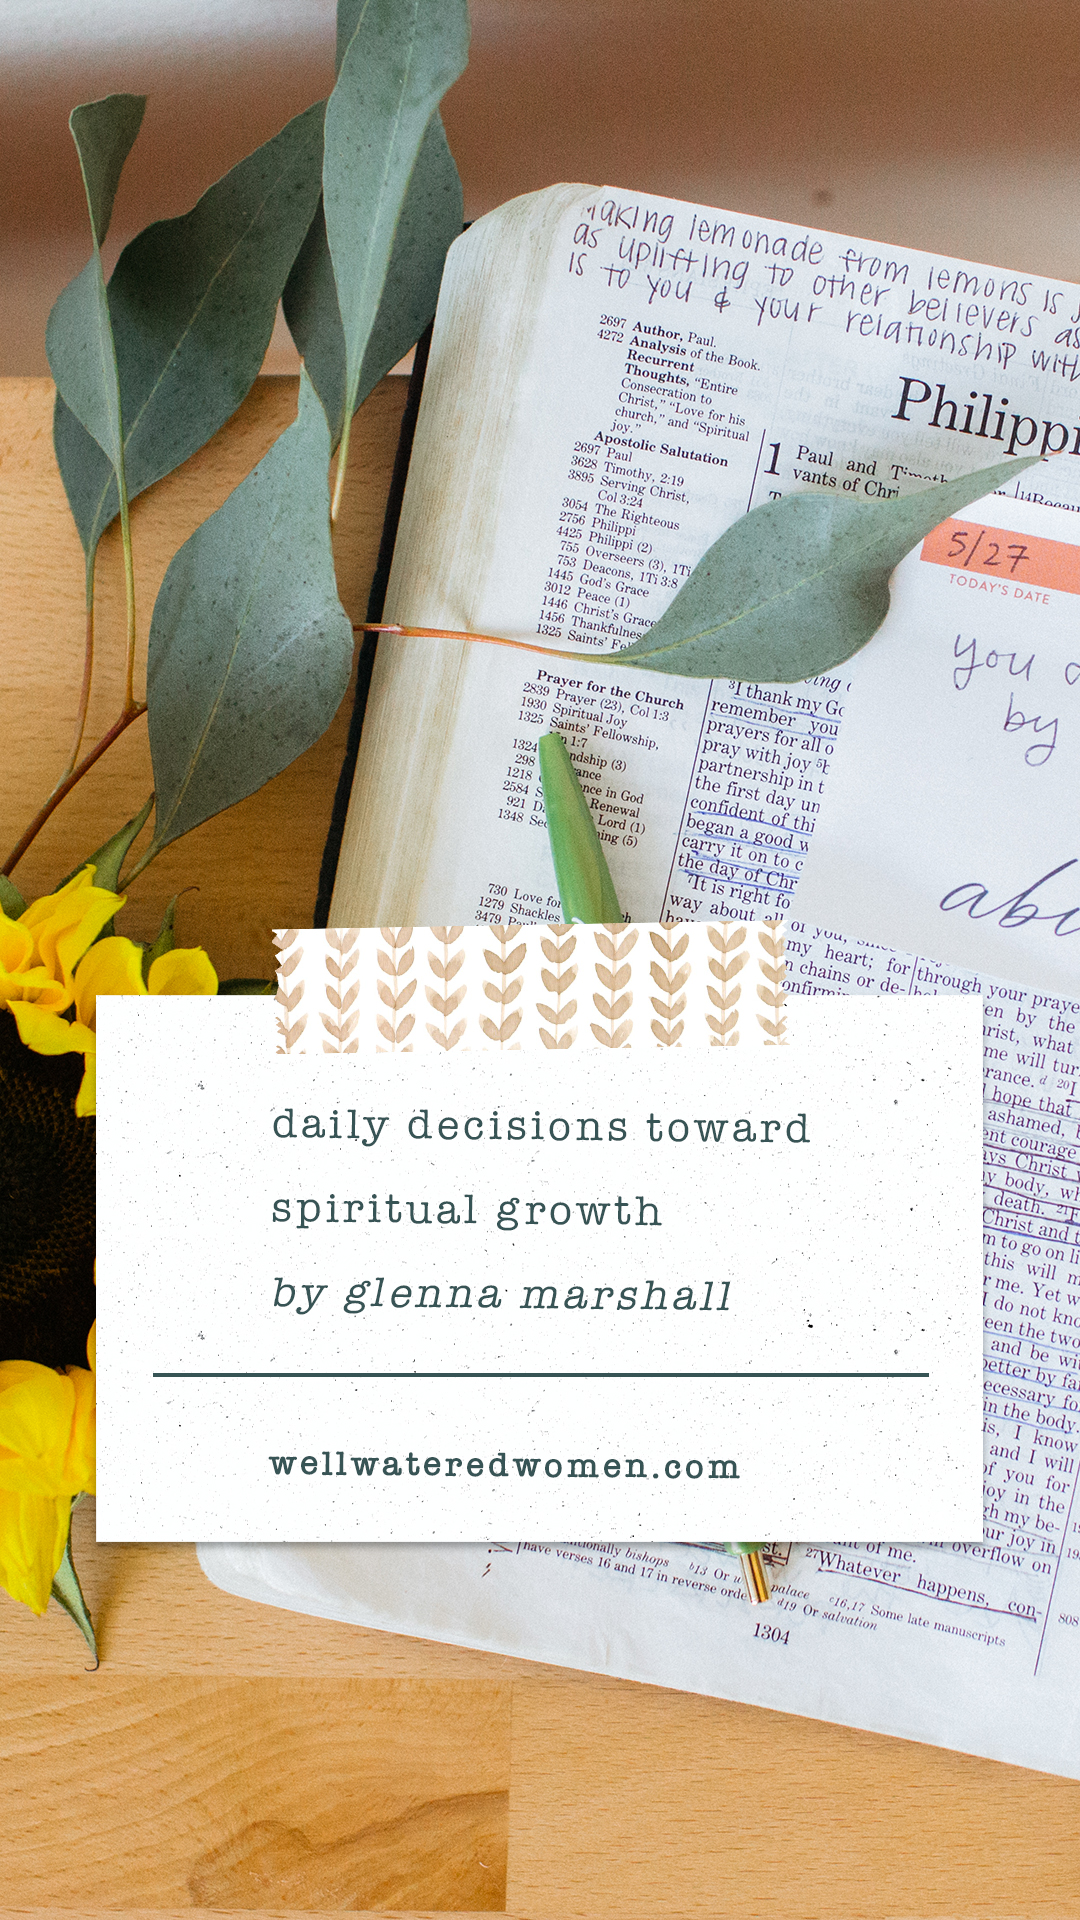 Well-Watered Women Blog | Daily Decisions Toward Spiritual Growth | By Glenna Marshall